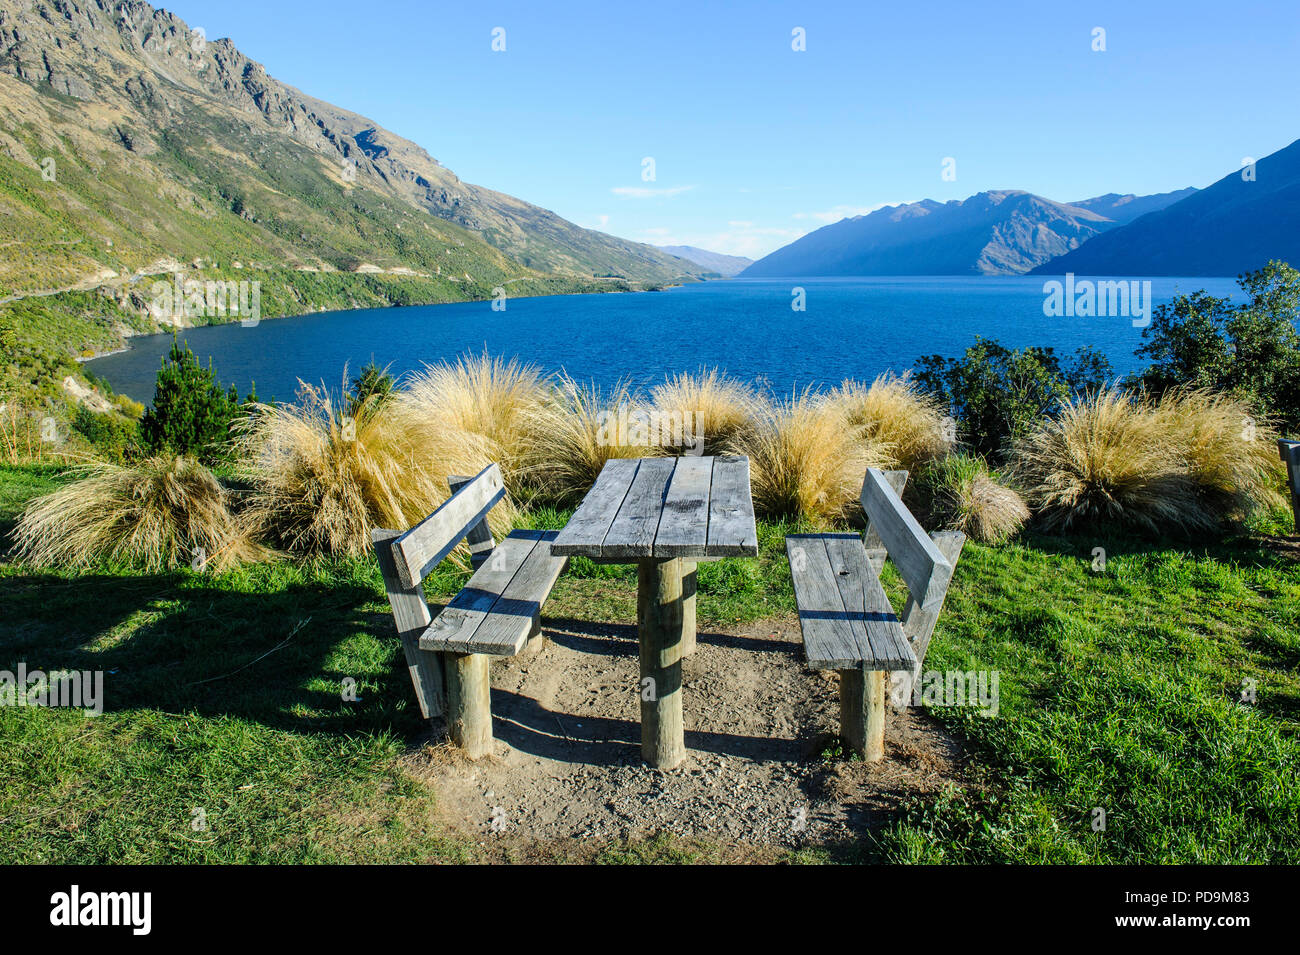 Picknick table on the shores of lake Wakatipu, Queenstown, South Island, New Zealand Stock Photo